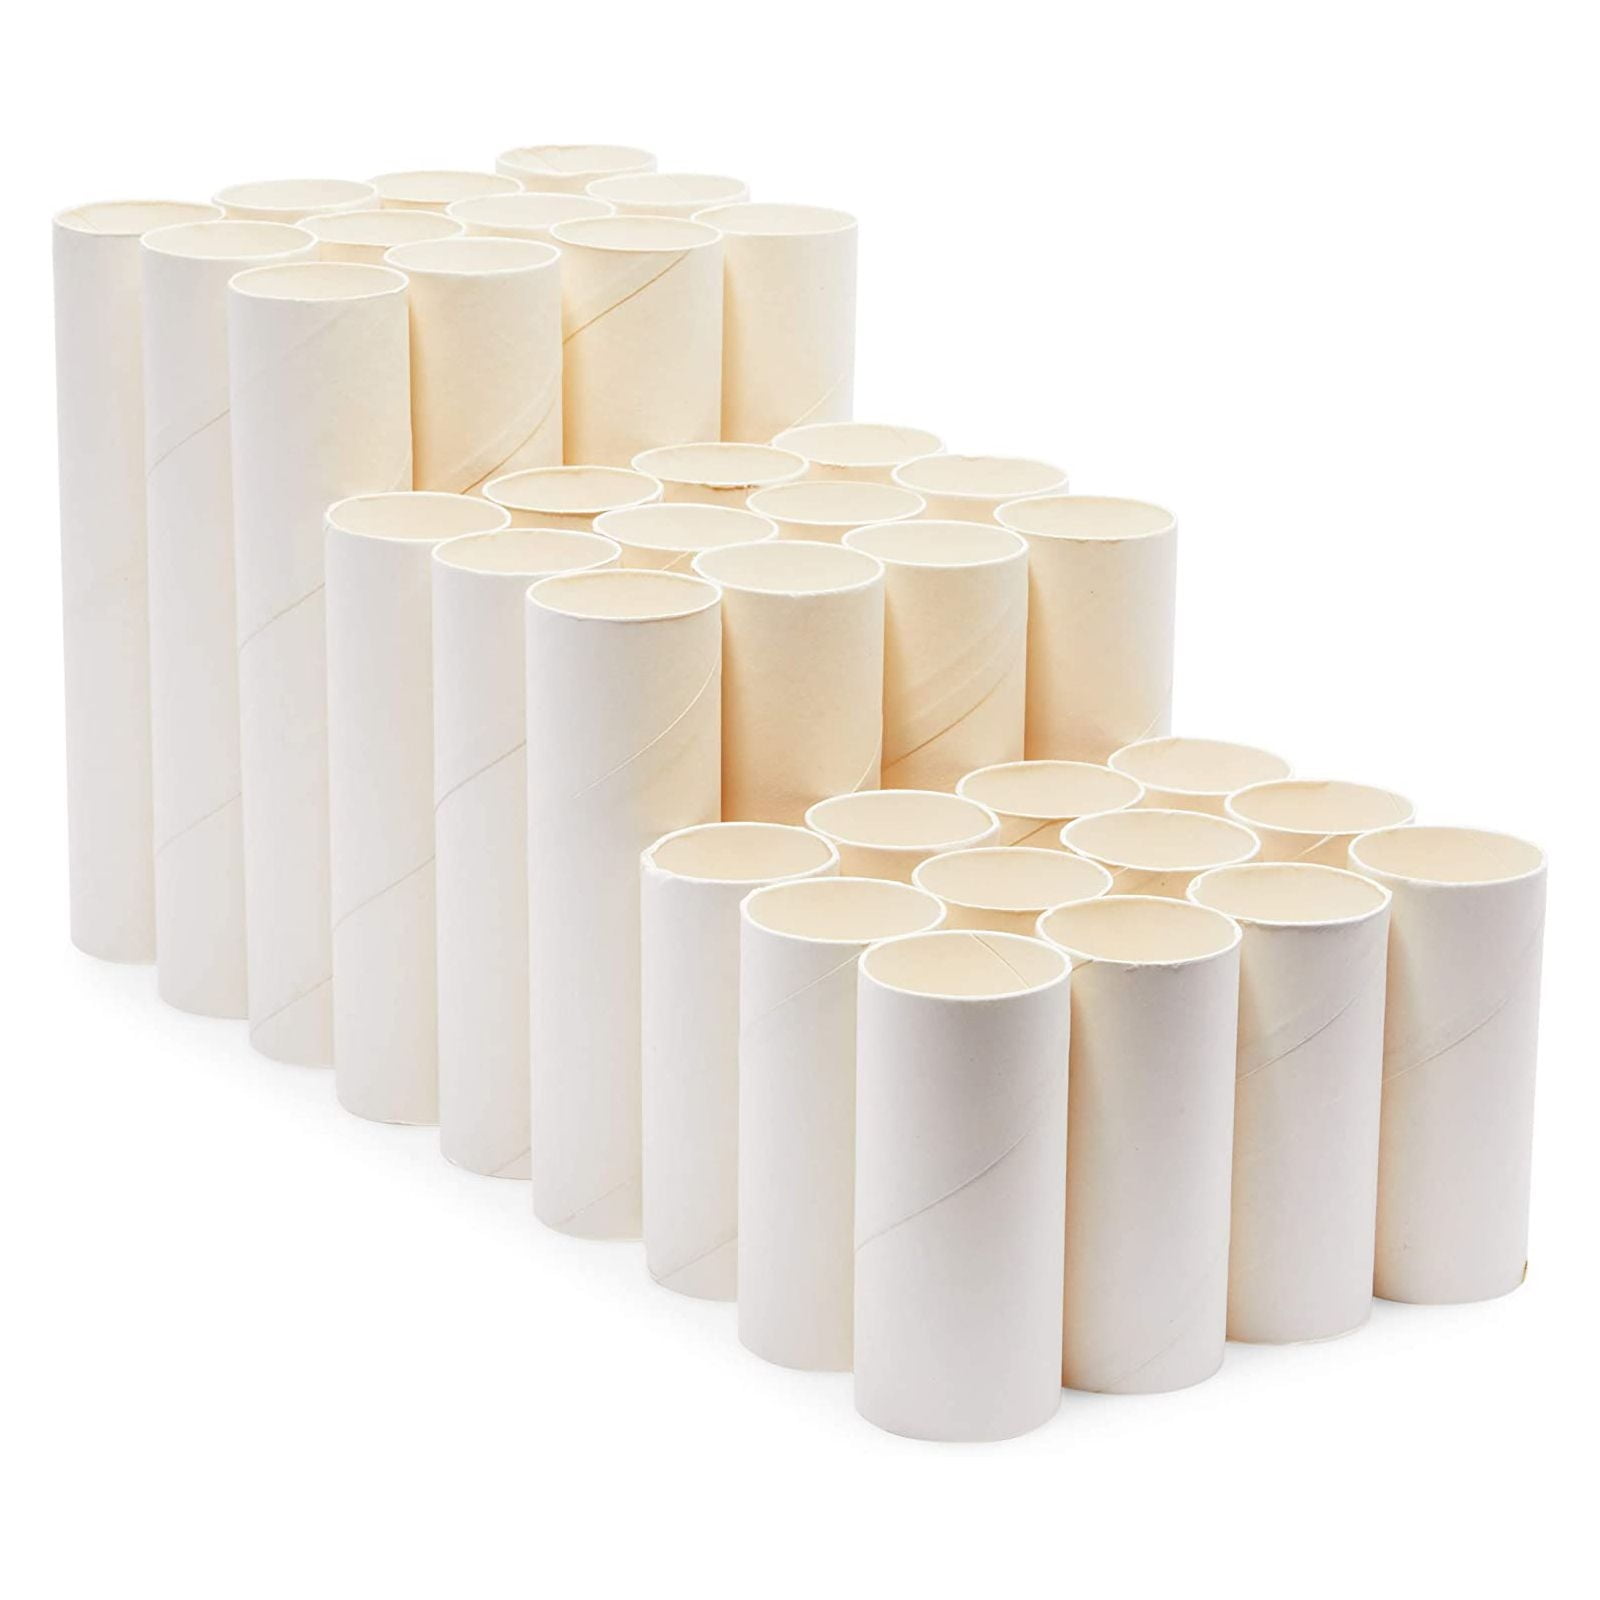 Tubes Cardboard Paper Tube Crafts Craft Roll Round Towel Rolls 20PCS Cardboard  Rolls Tubes Empty Toilet Paper Rolls For Crafts - AliExpress